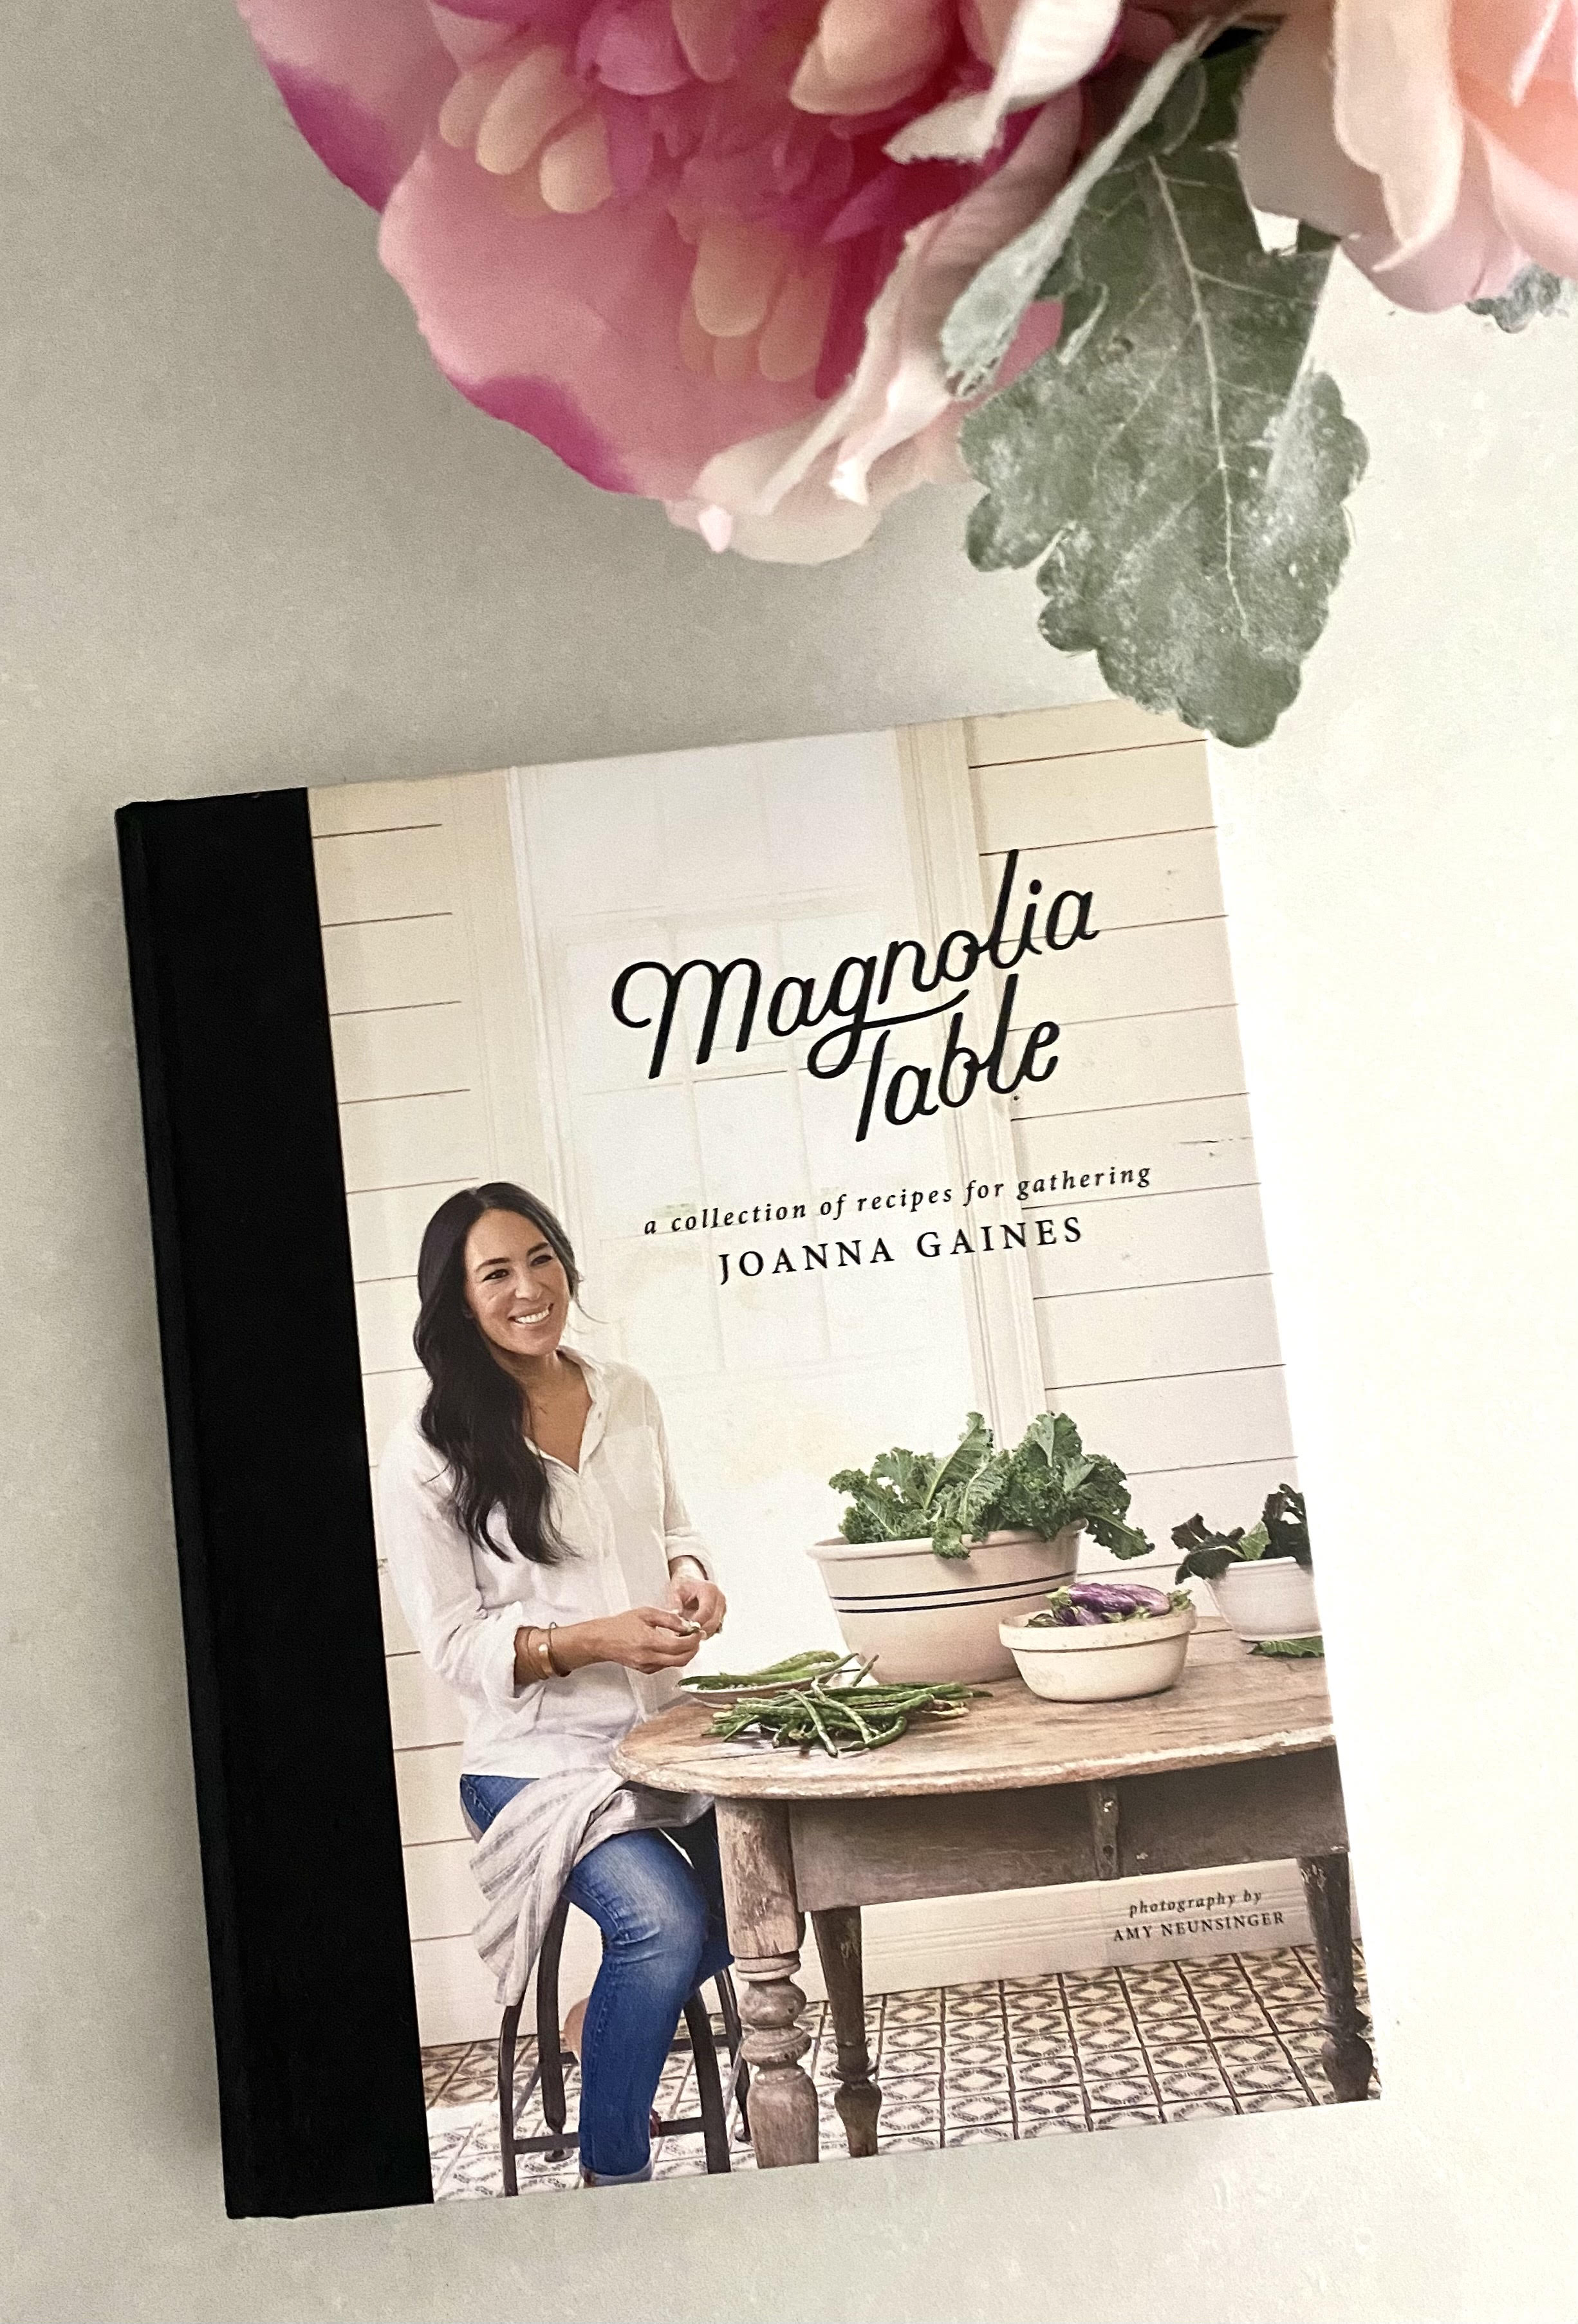 The Magnolia Table cookbook 2nd edition filled with recipes for gathering with family and friends. 